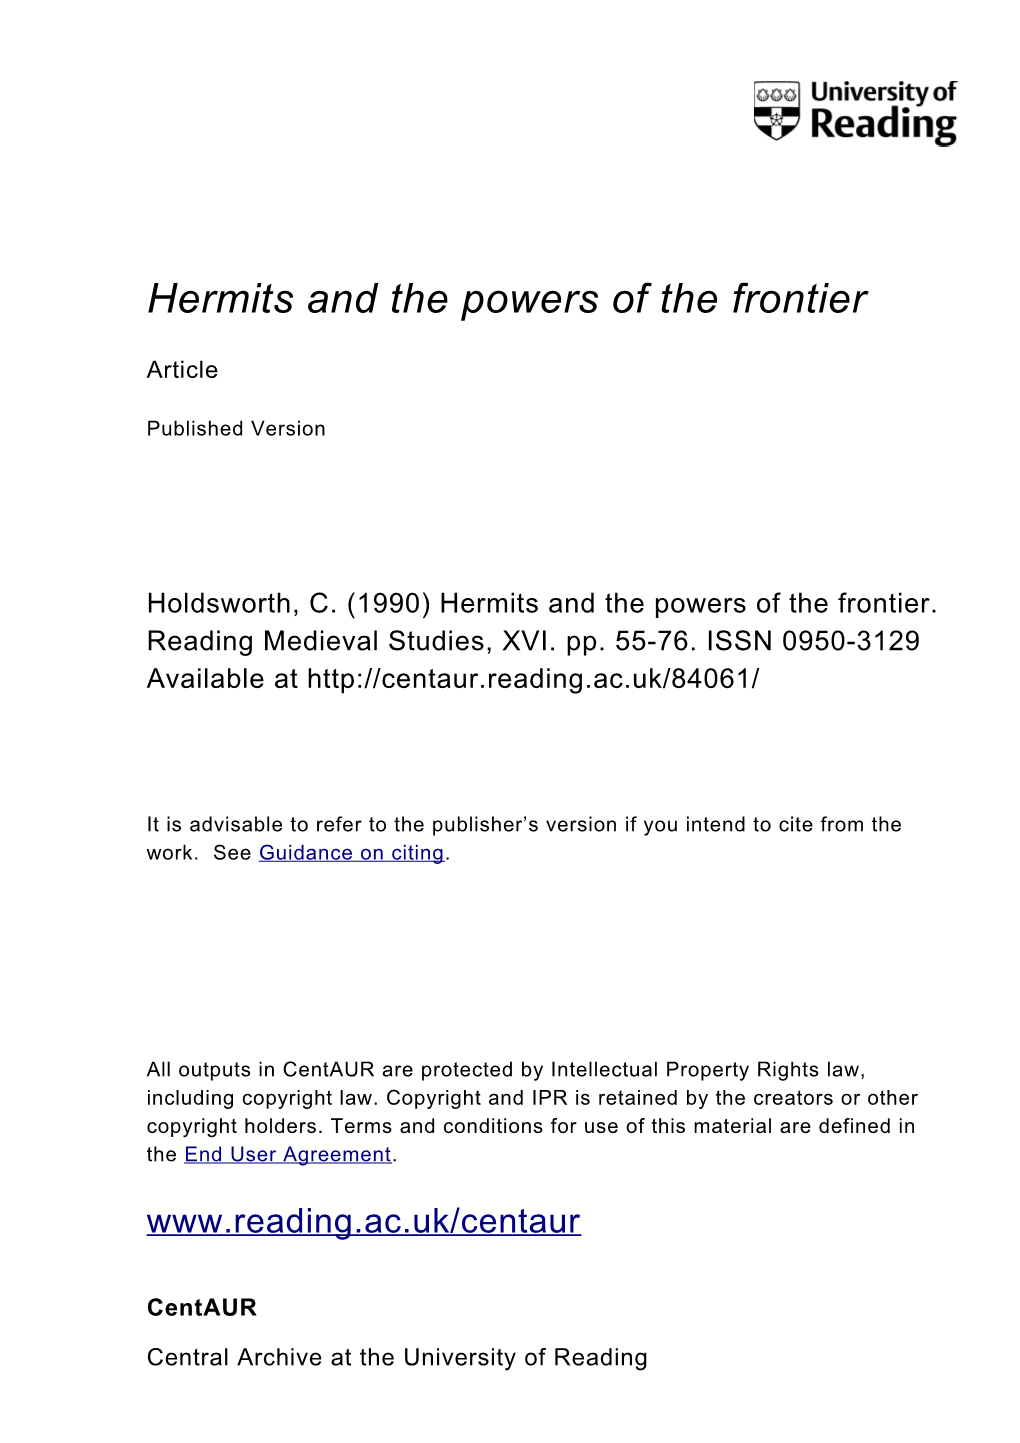 Hermits and the Powers of the Frontier